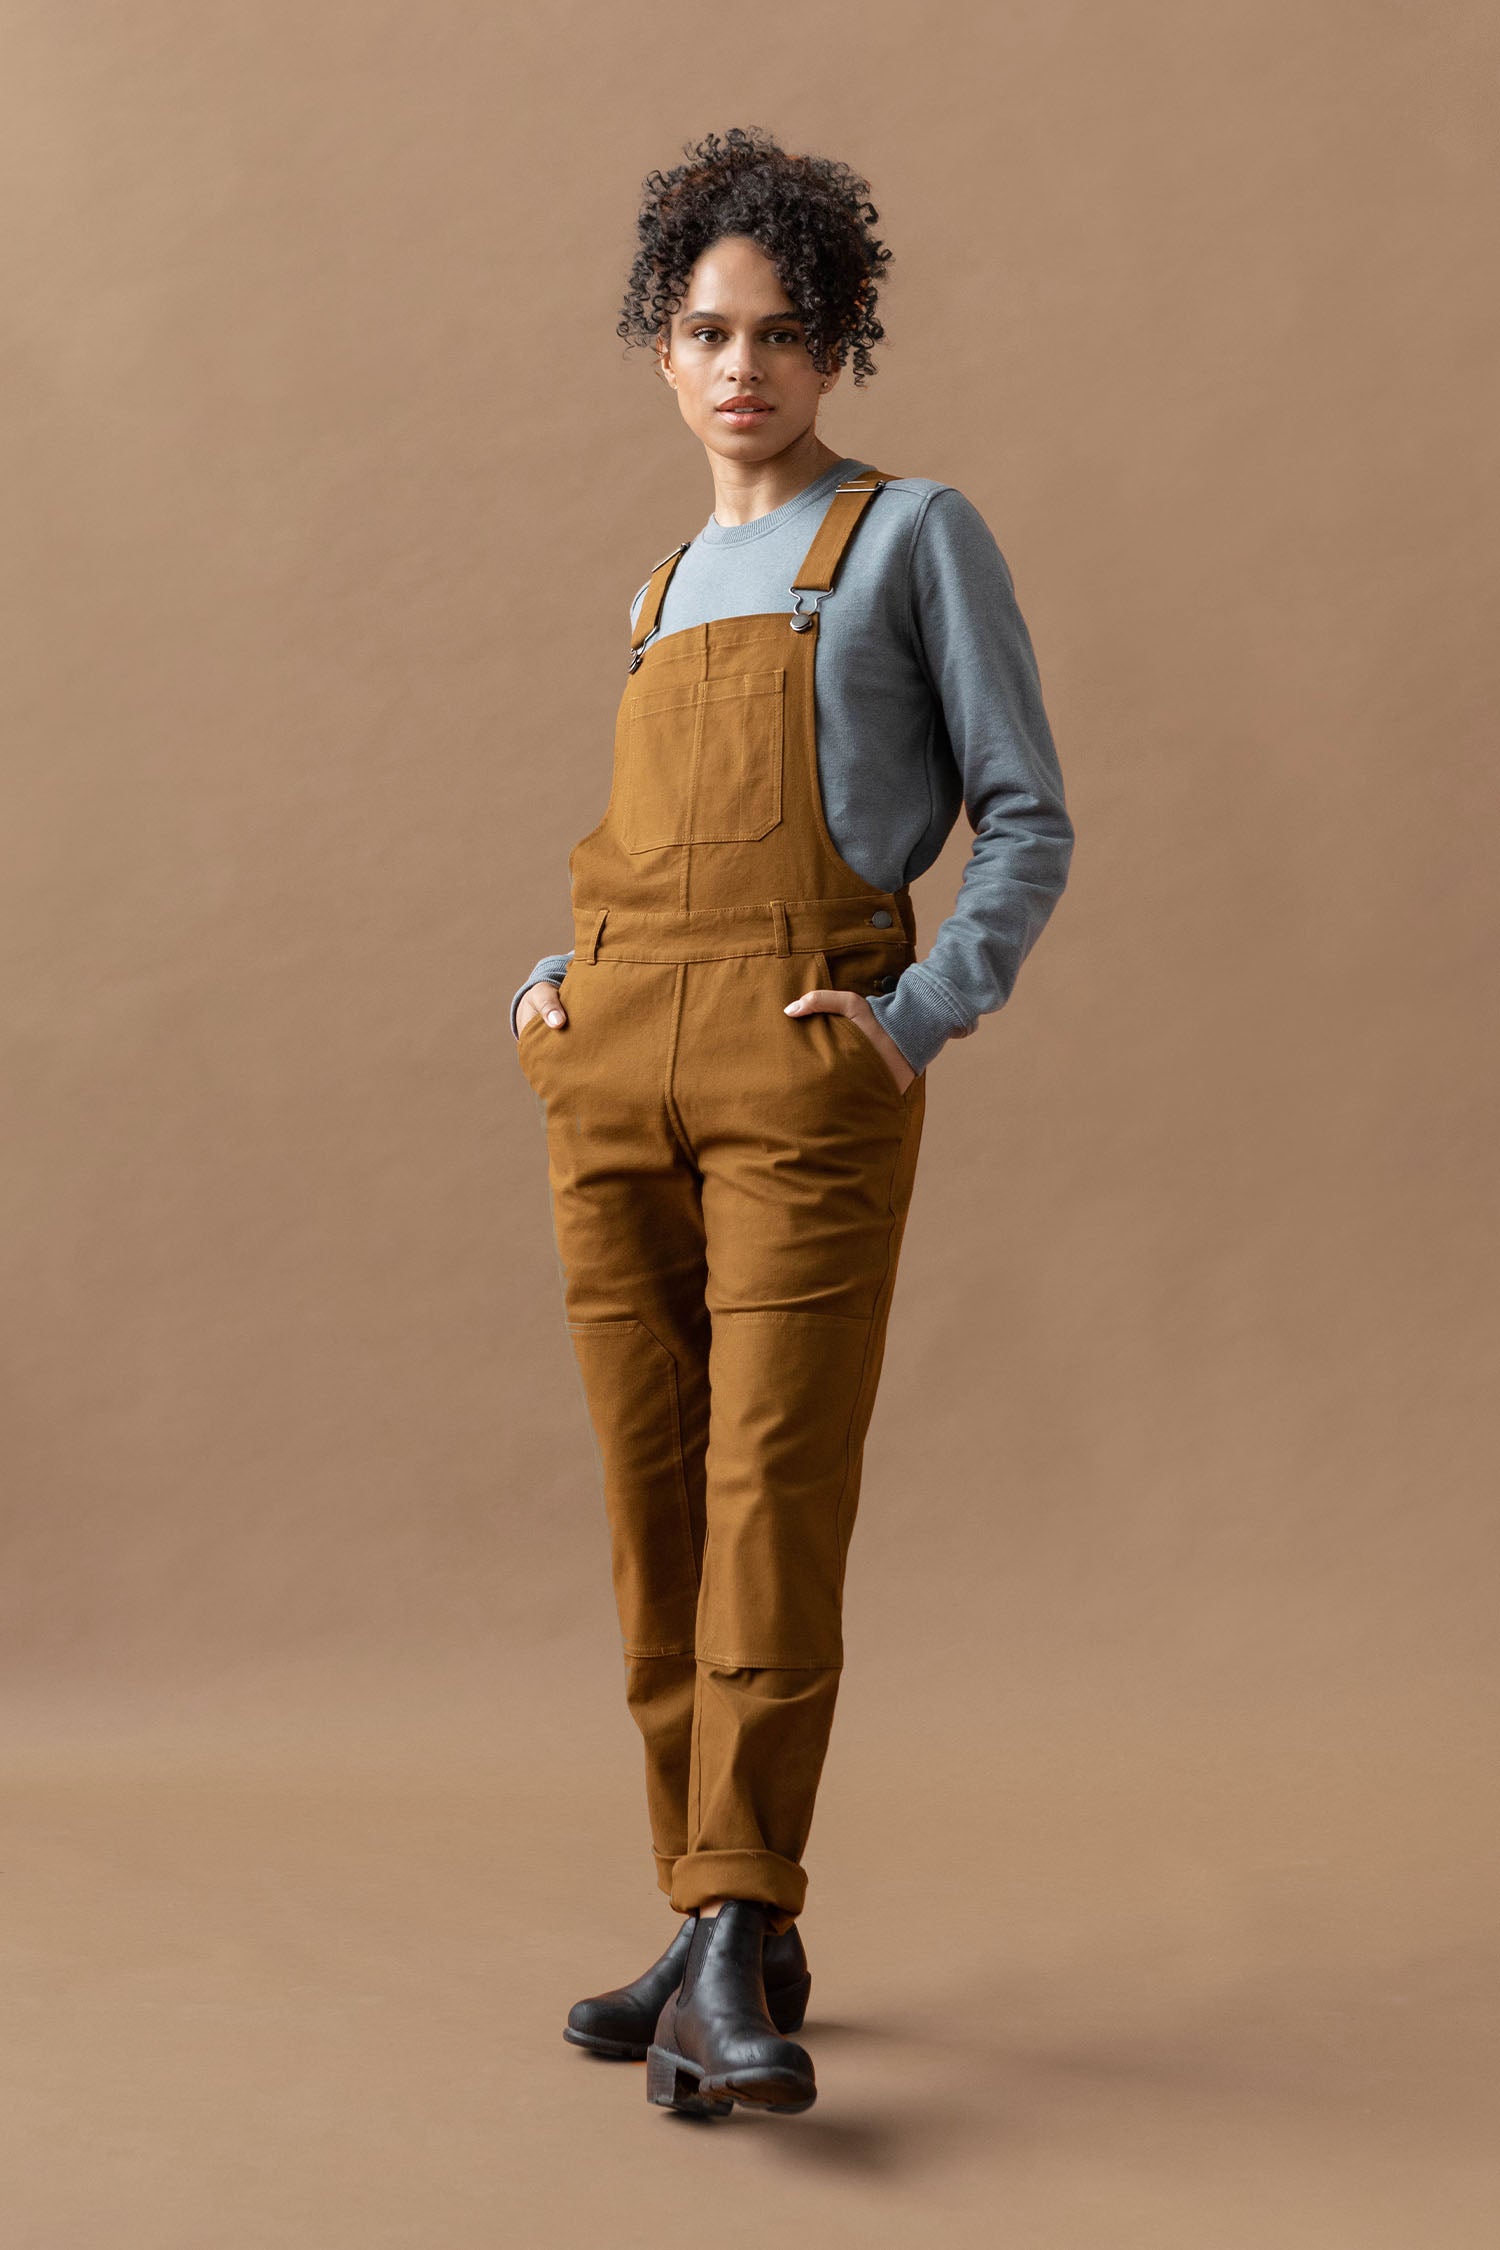 Tobin Utility Overall / Brown Canvas